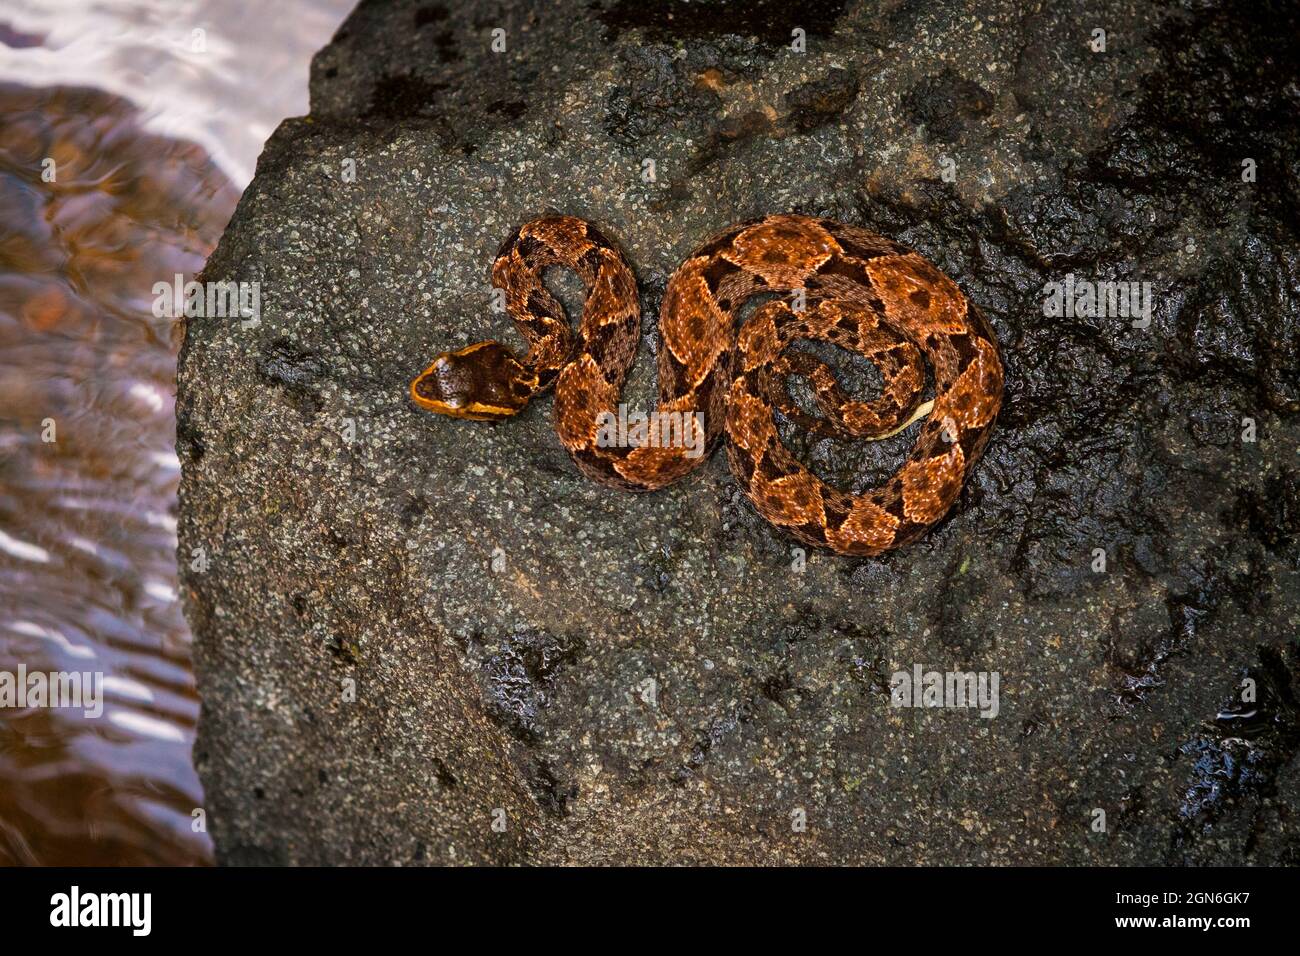 A venomous Fer-de-lance snake, Bothrops asper, on a rock in a small river along the old Camino Real trail, Chagres National Park, Republic of Panama. Stock Photo